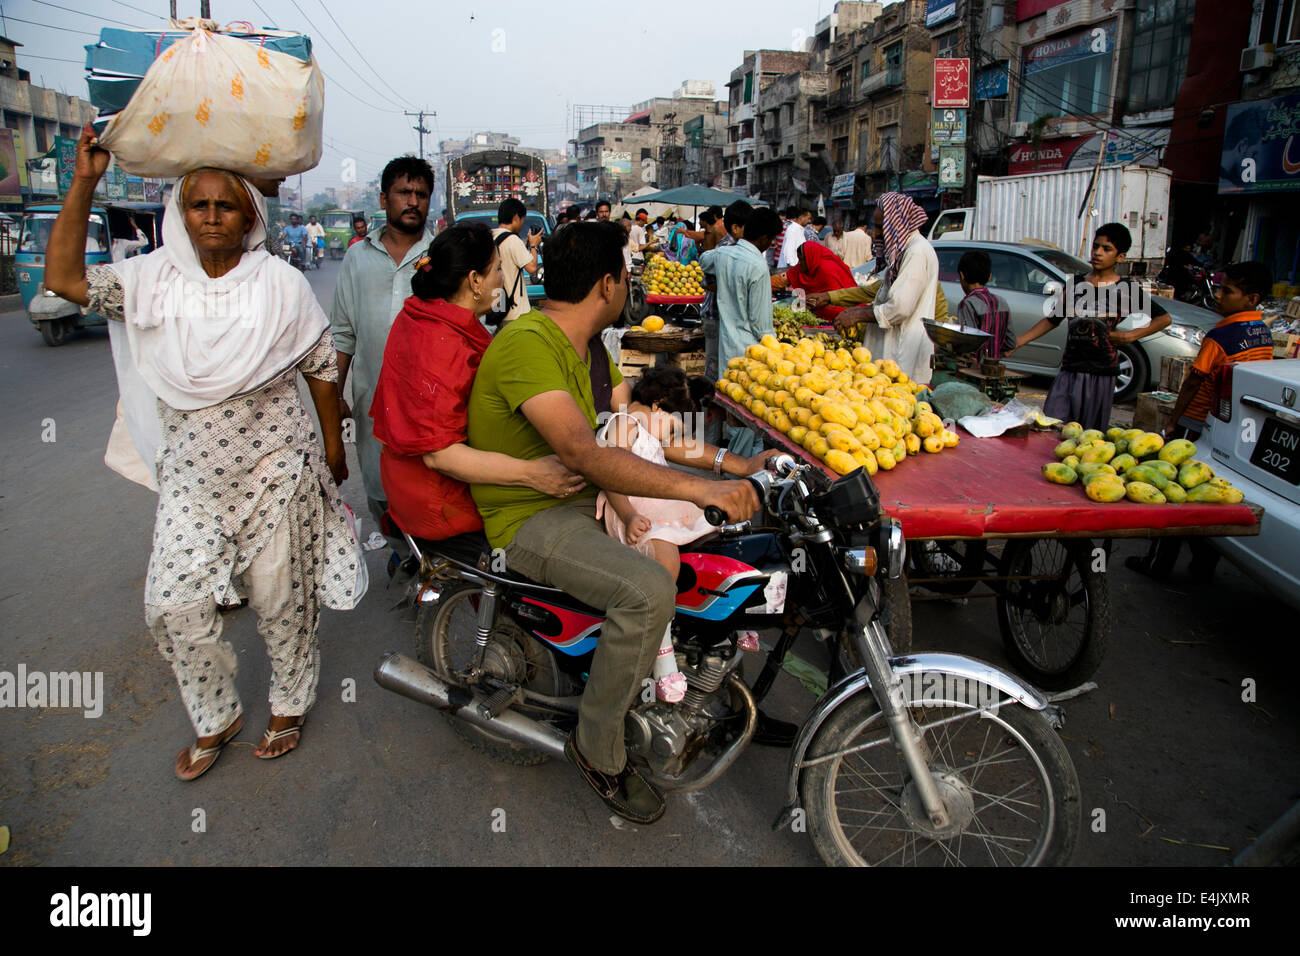 People on the street in Lahore Stock Photo